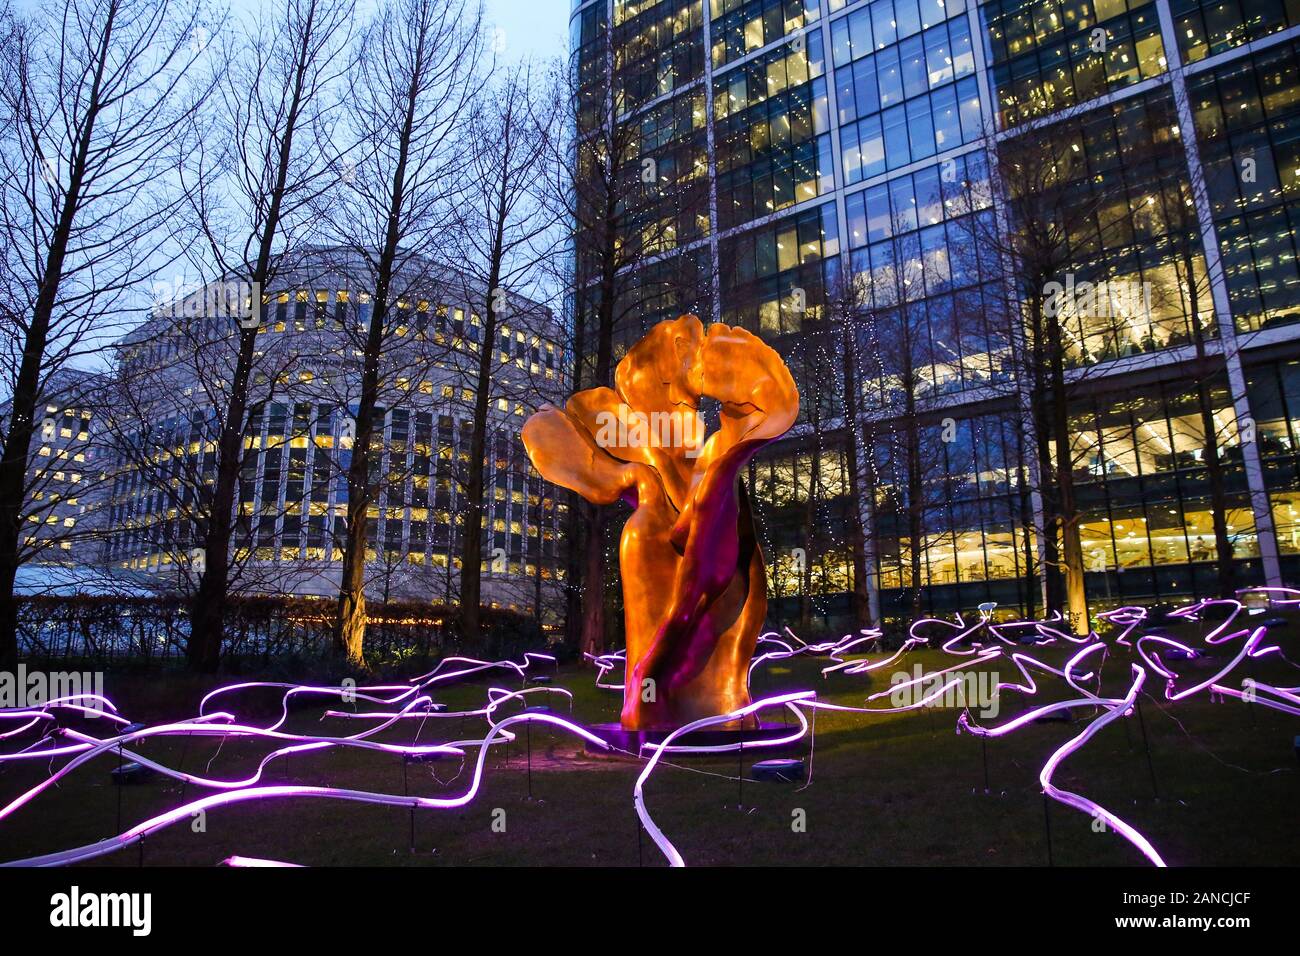 London, USA. 16th Jan, 2020. Squiggle art installation is seen during the opening day of the Canary Wharf Winter Light Festival in Docklands, London. The festival is open to public daily from 4pm to 10pm until 25 January 2020. Squiggle is a winding mass of 450 metres of digital neon tubing twisting and turning to fill Jubilee Park. This unique sensory journey is created by the artist's innovative manipulation of space and sense.Interact with the installation, an abstract reflection of this very multicultural world we live in by viewing it from all its different angles as you vent Stock Photo